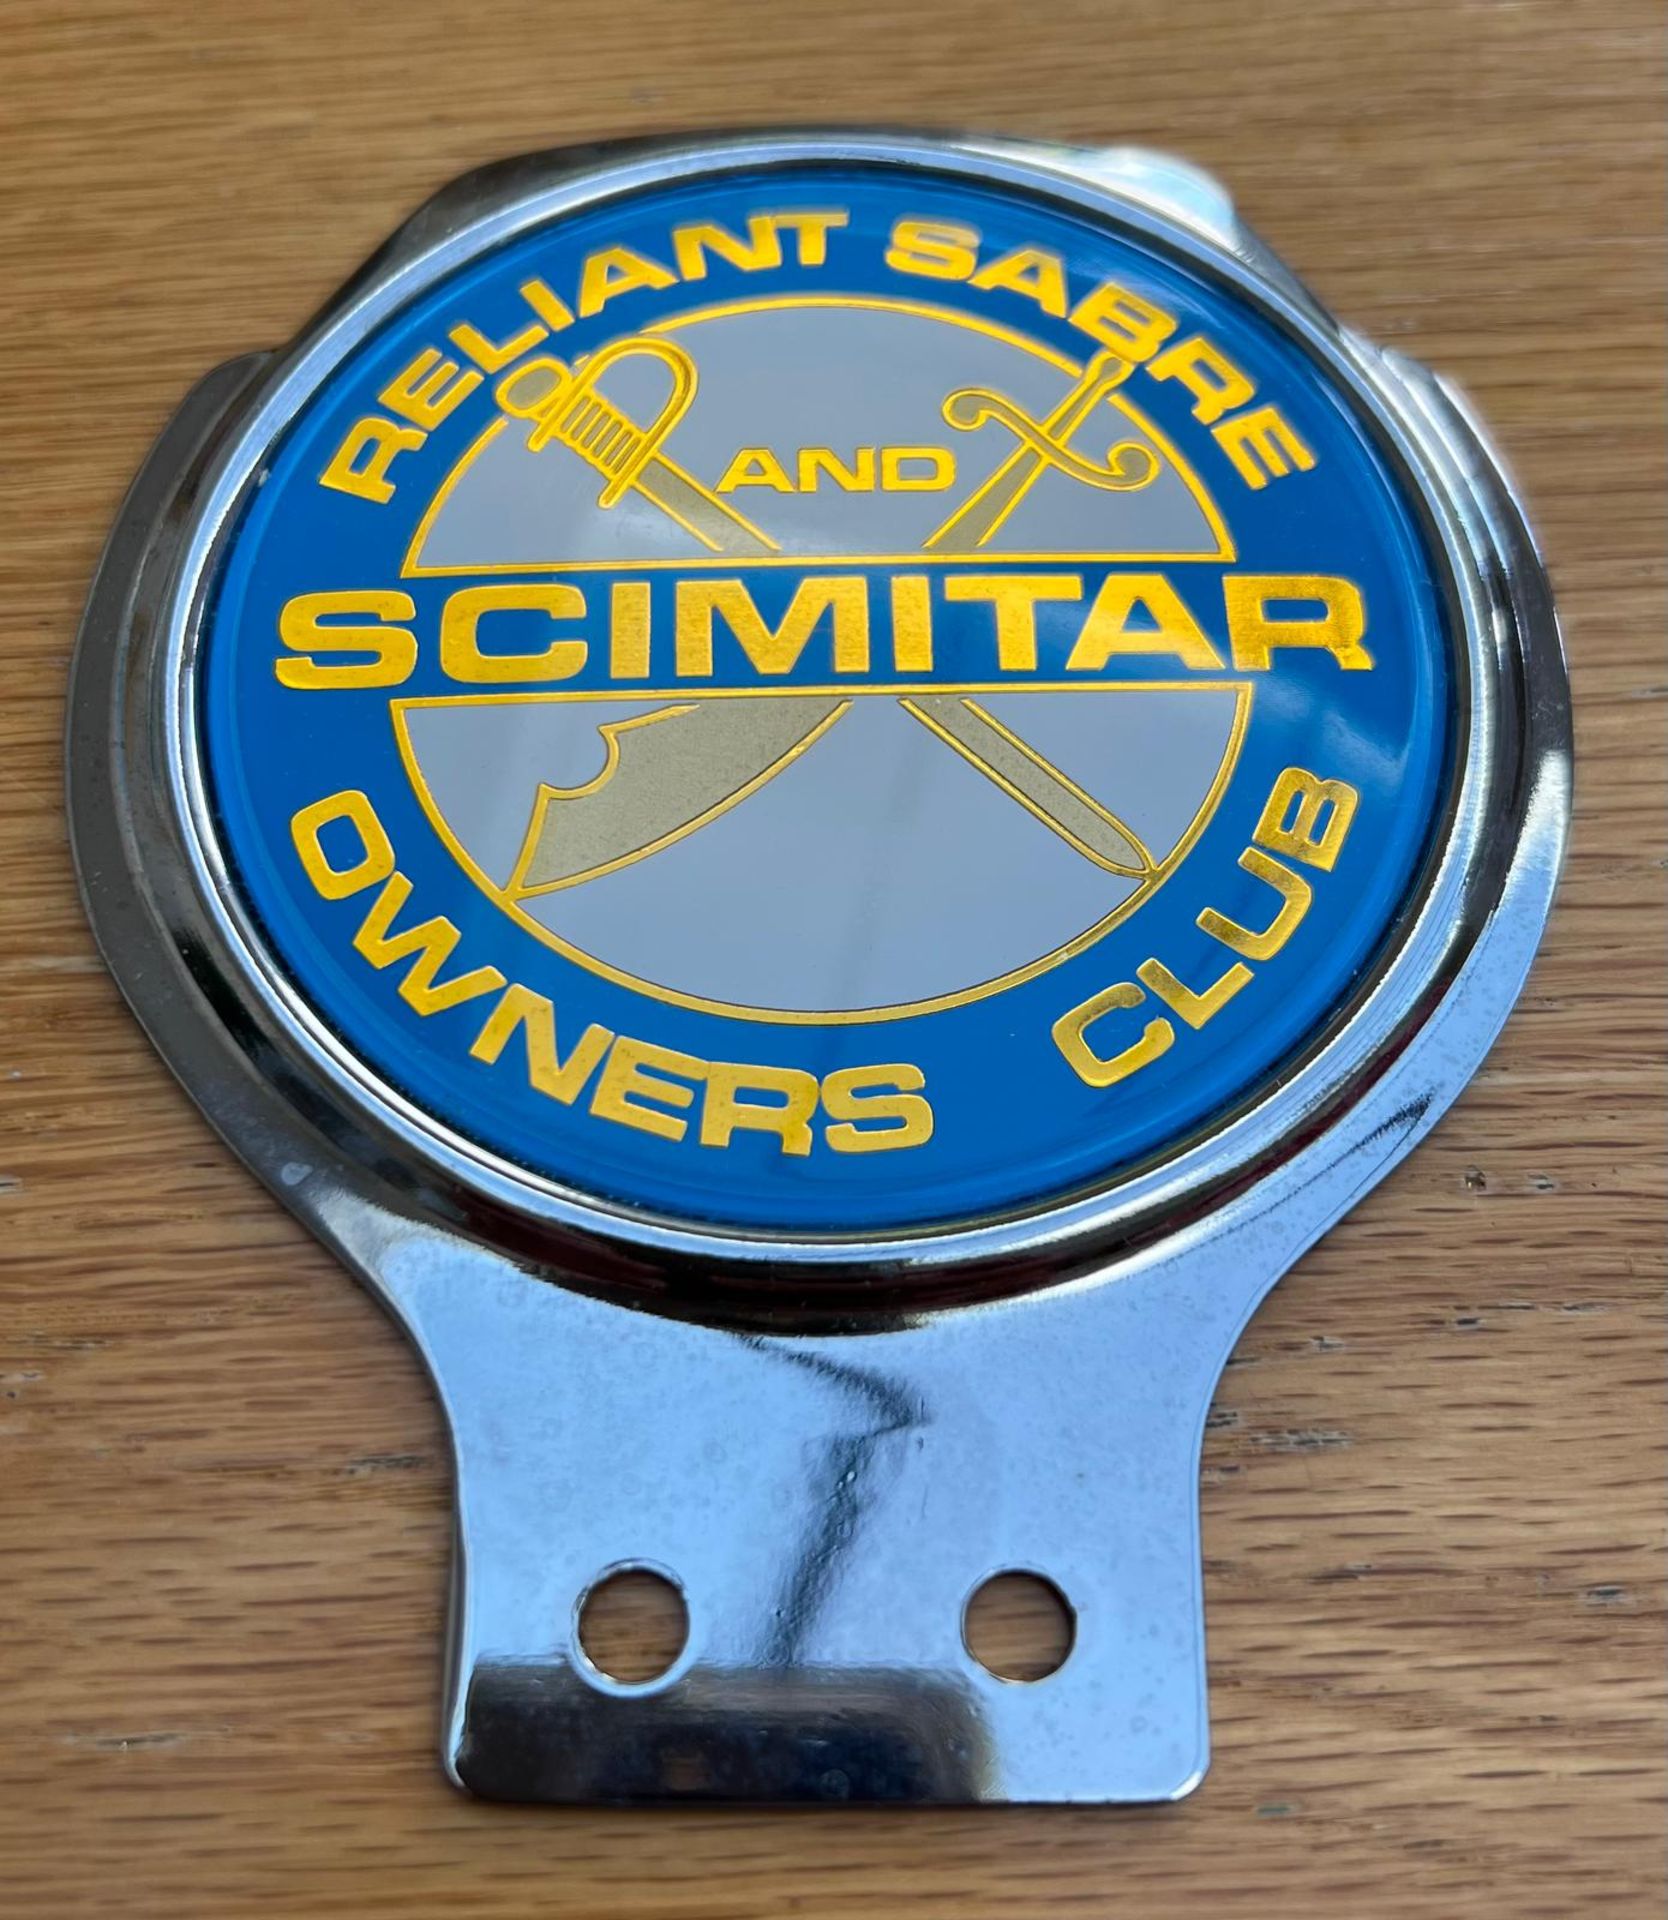 A rare Reliant Sabre & Scimitar Owners Club grill badge by Renamel of London. Measuring 11cm high. - Image 2 of 3